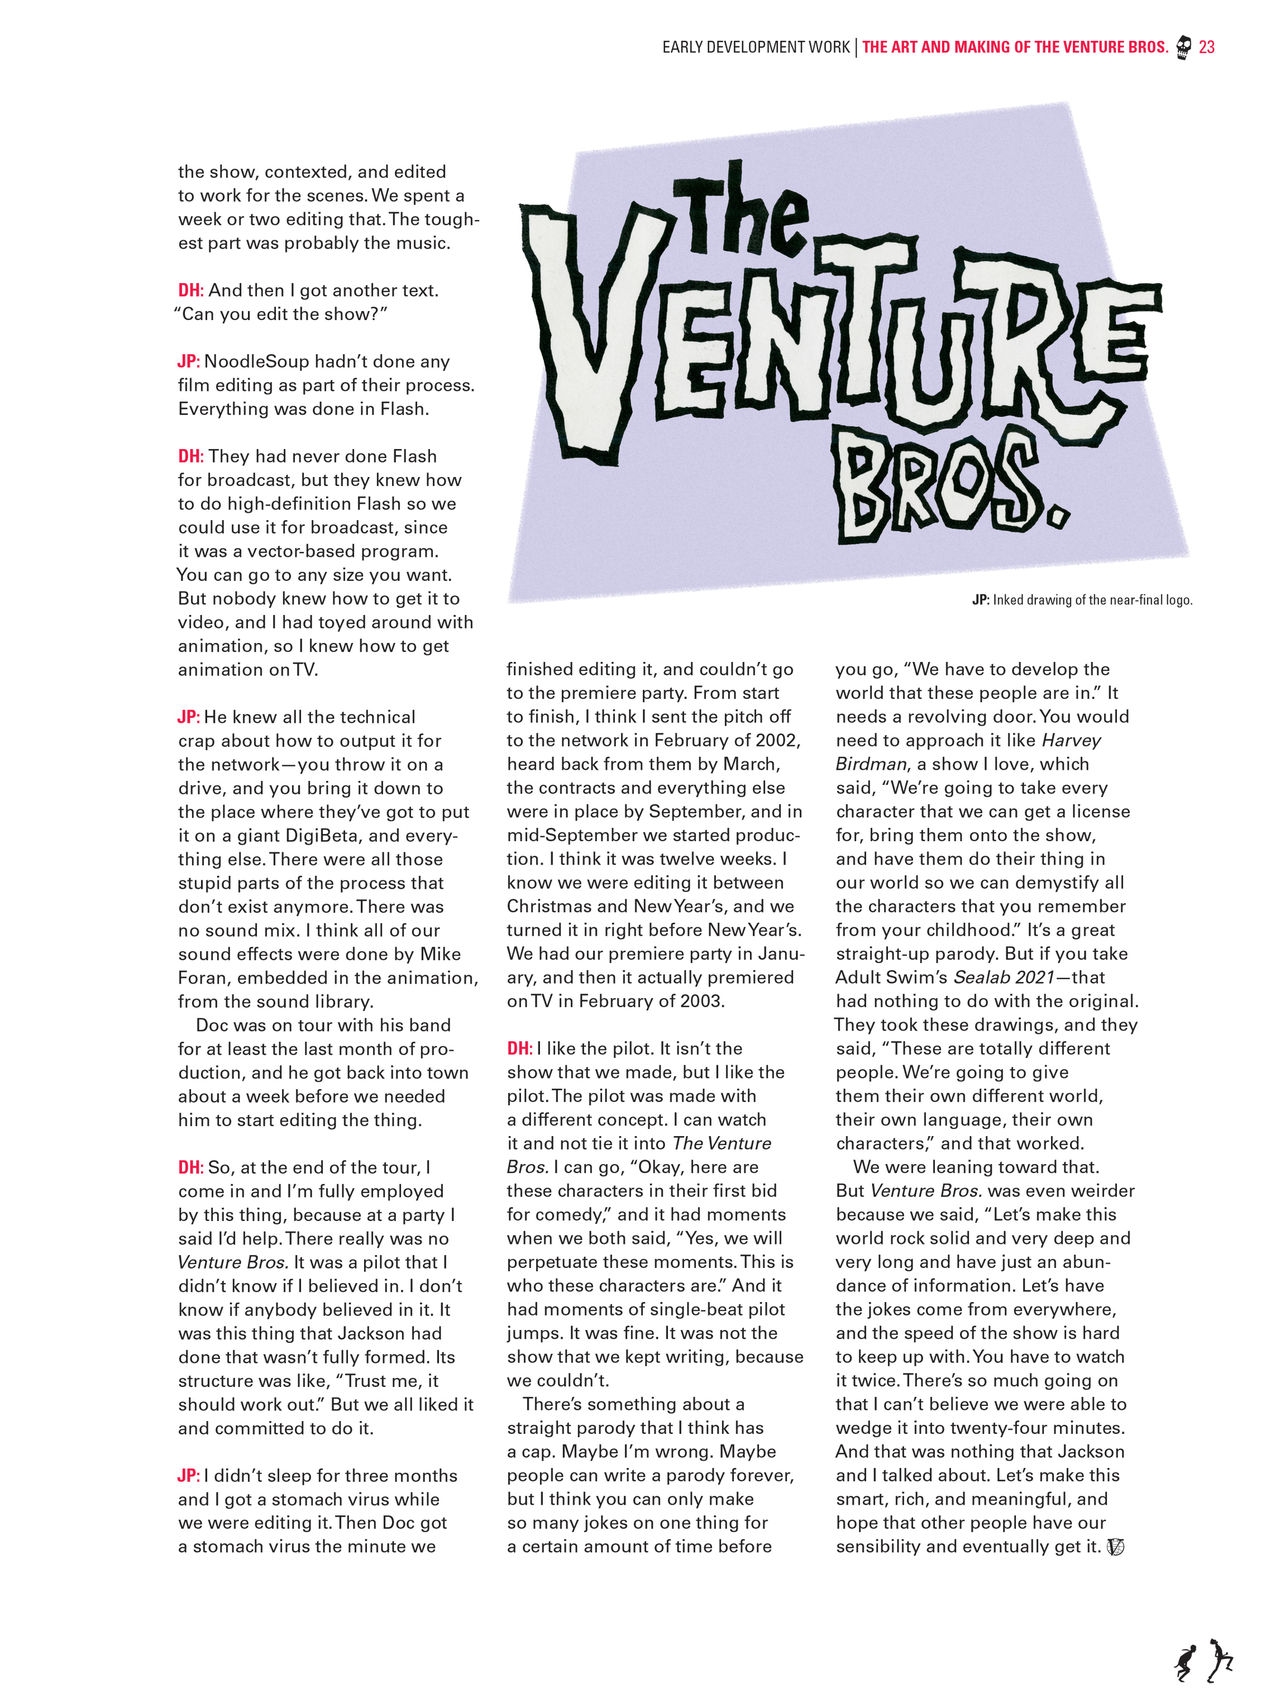 Go Team Venture! - The Art and Making of the Venture Bros 22